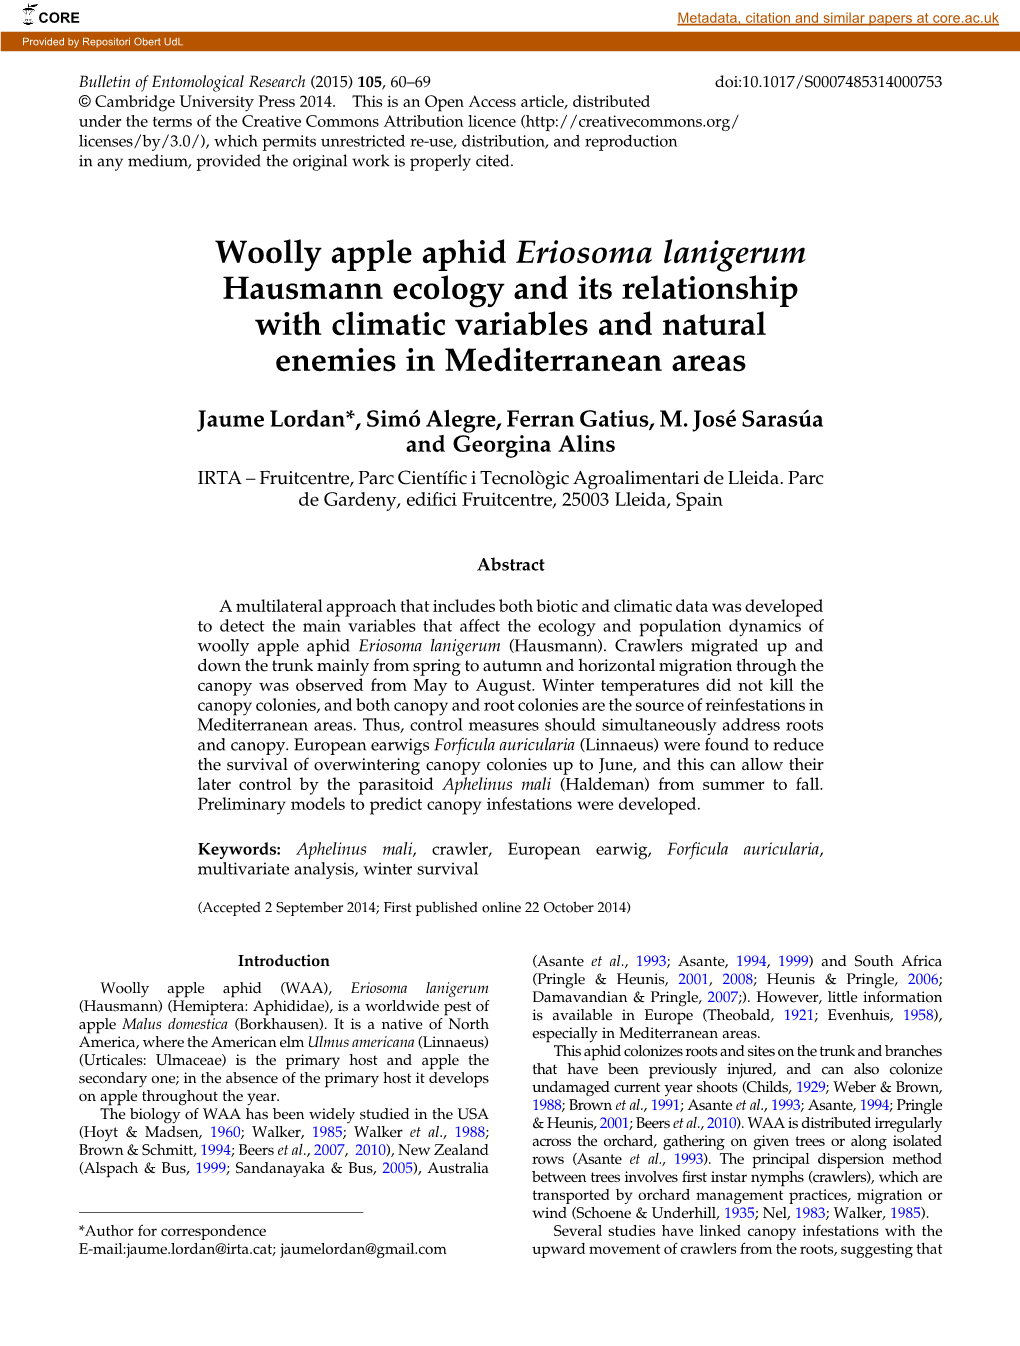 Woolly Apple Aphid Eriosoma Lanigerum Hausmann Ecology and Its Relationship with Climatic Variables and Natural Enemies in Mediterranean Areas